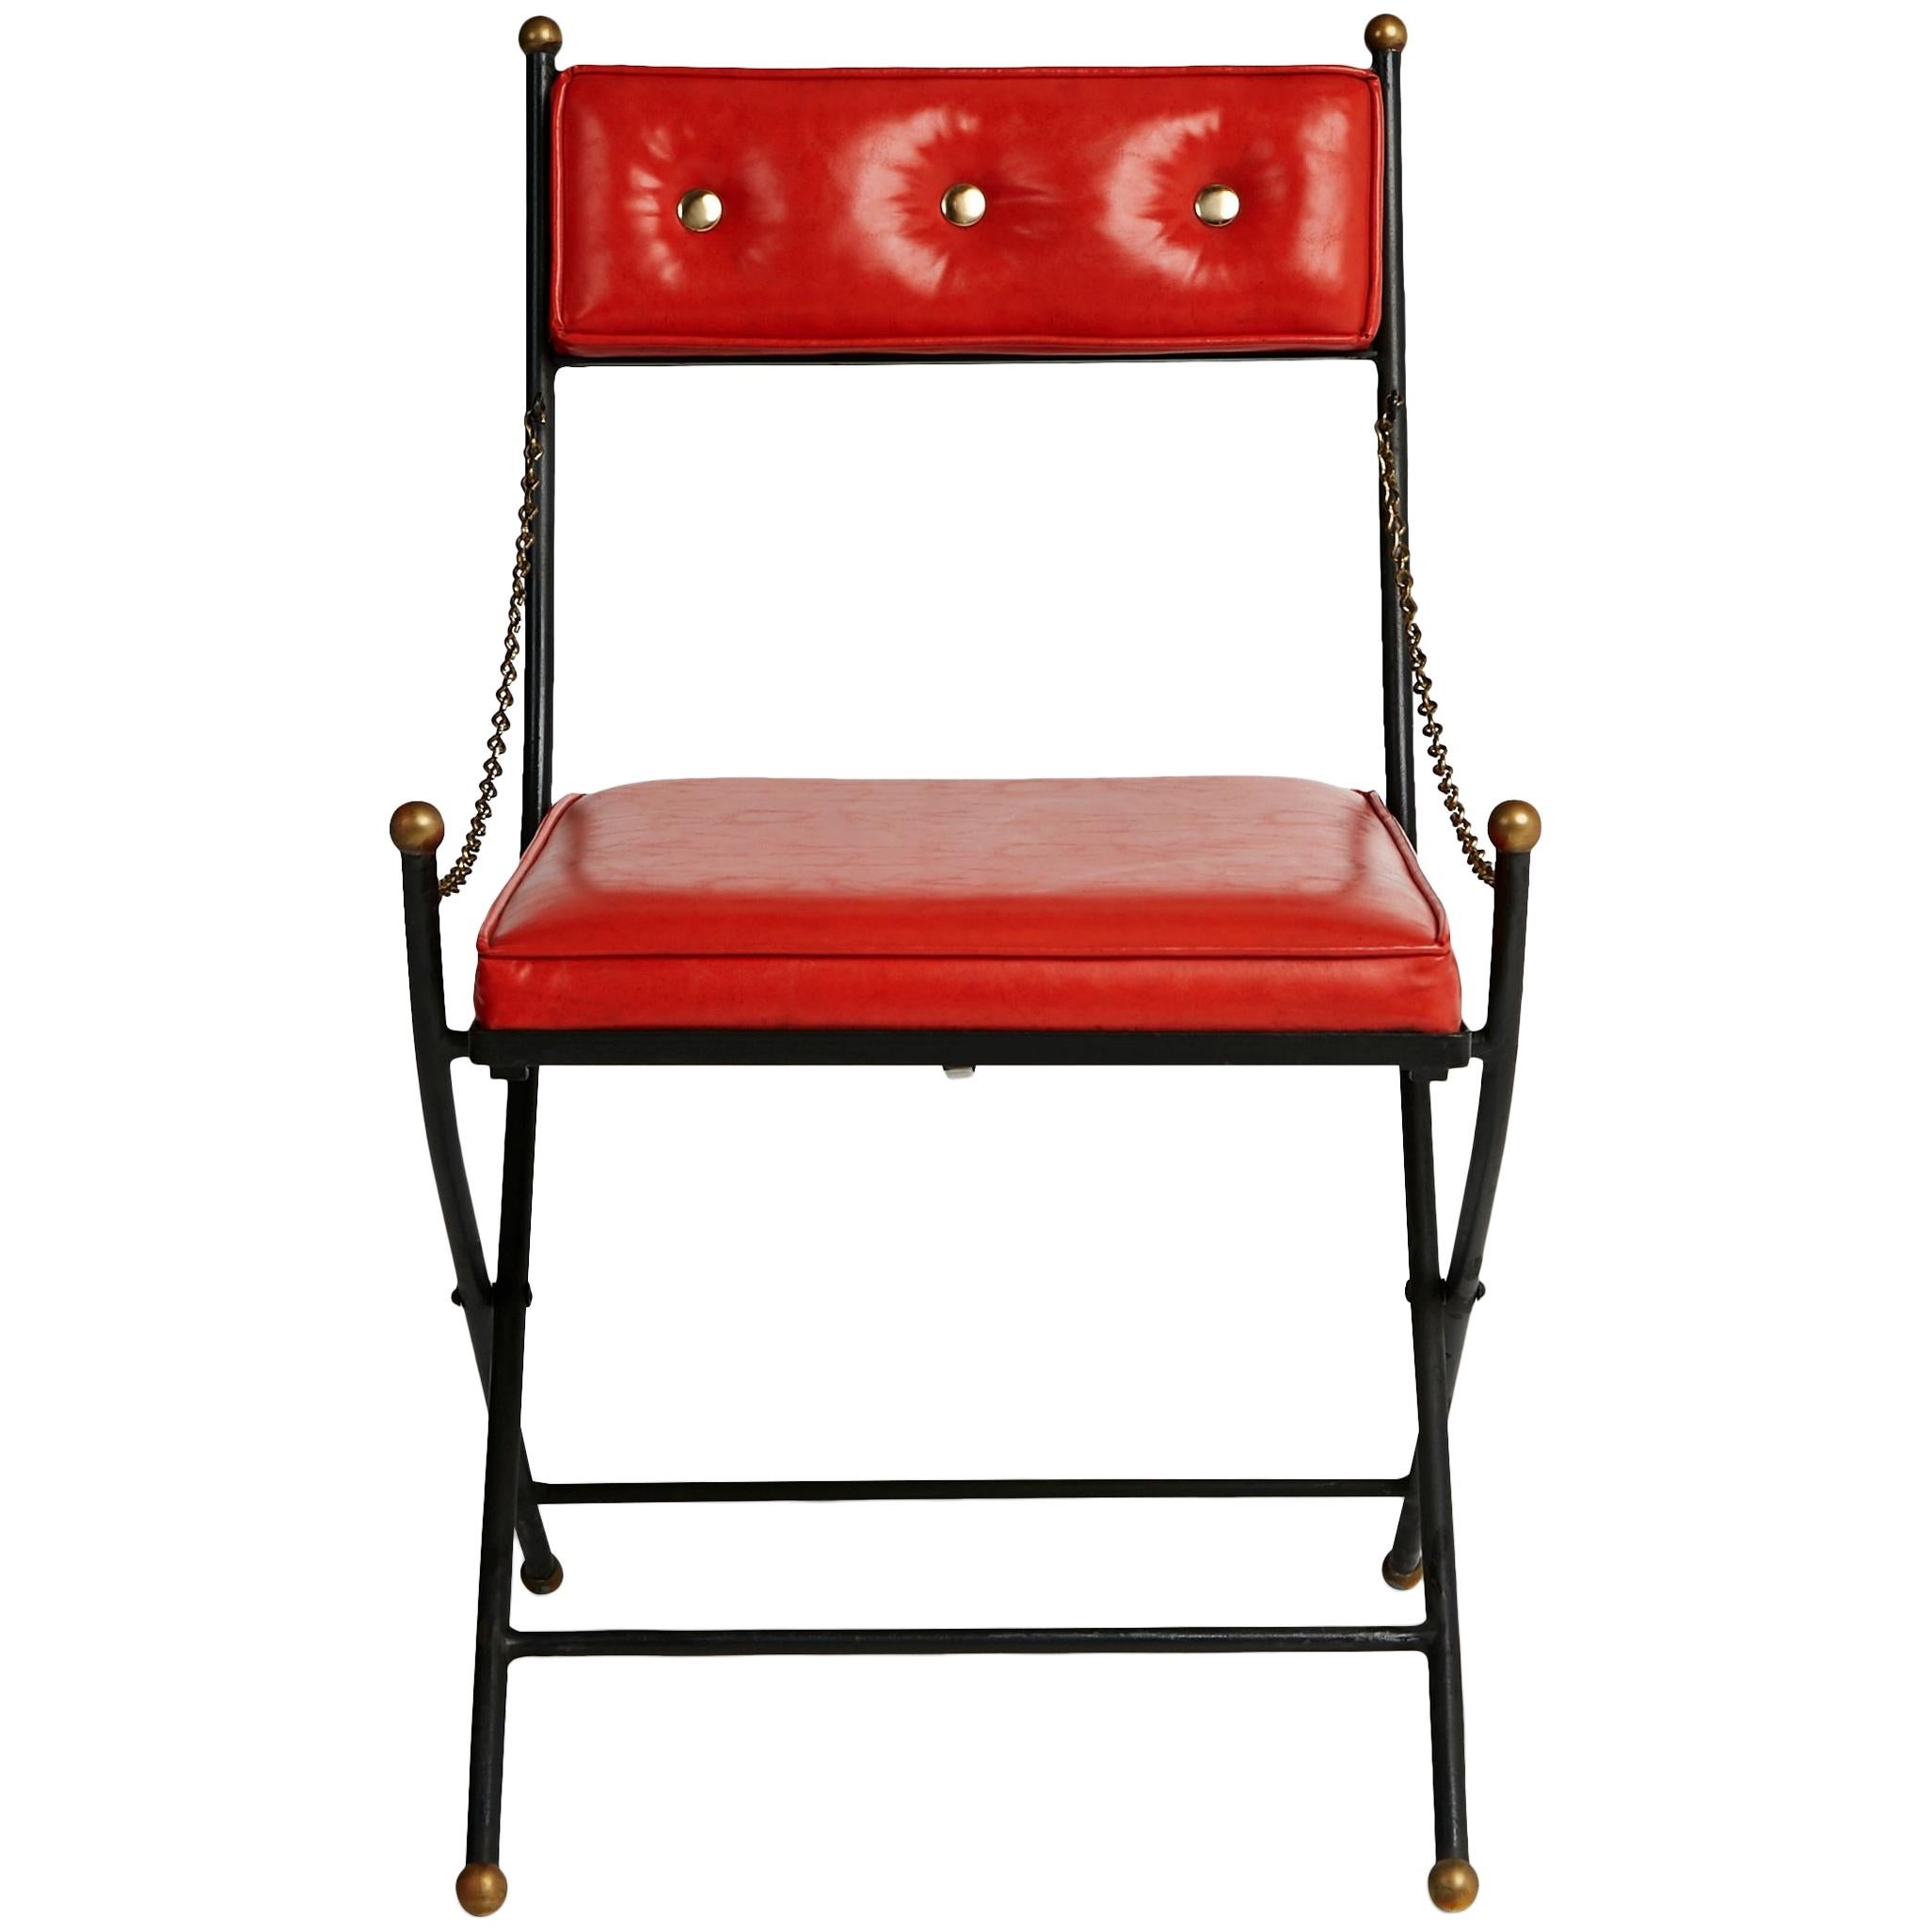 Set of four (4) campaign folding chairs in the style of Maison Jansen and Tommi Parzinger. This elegant Mid-Century Modern meets Hollywood Regency set comprises of four red folding chairs upholstered in faux leather. They feature brass metal